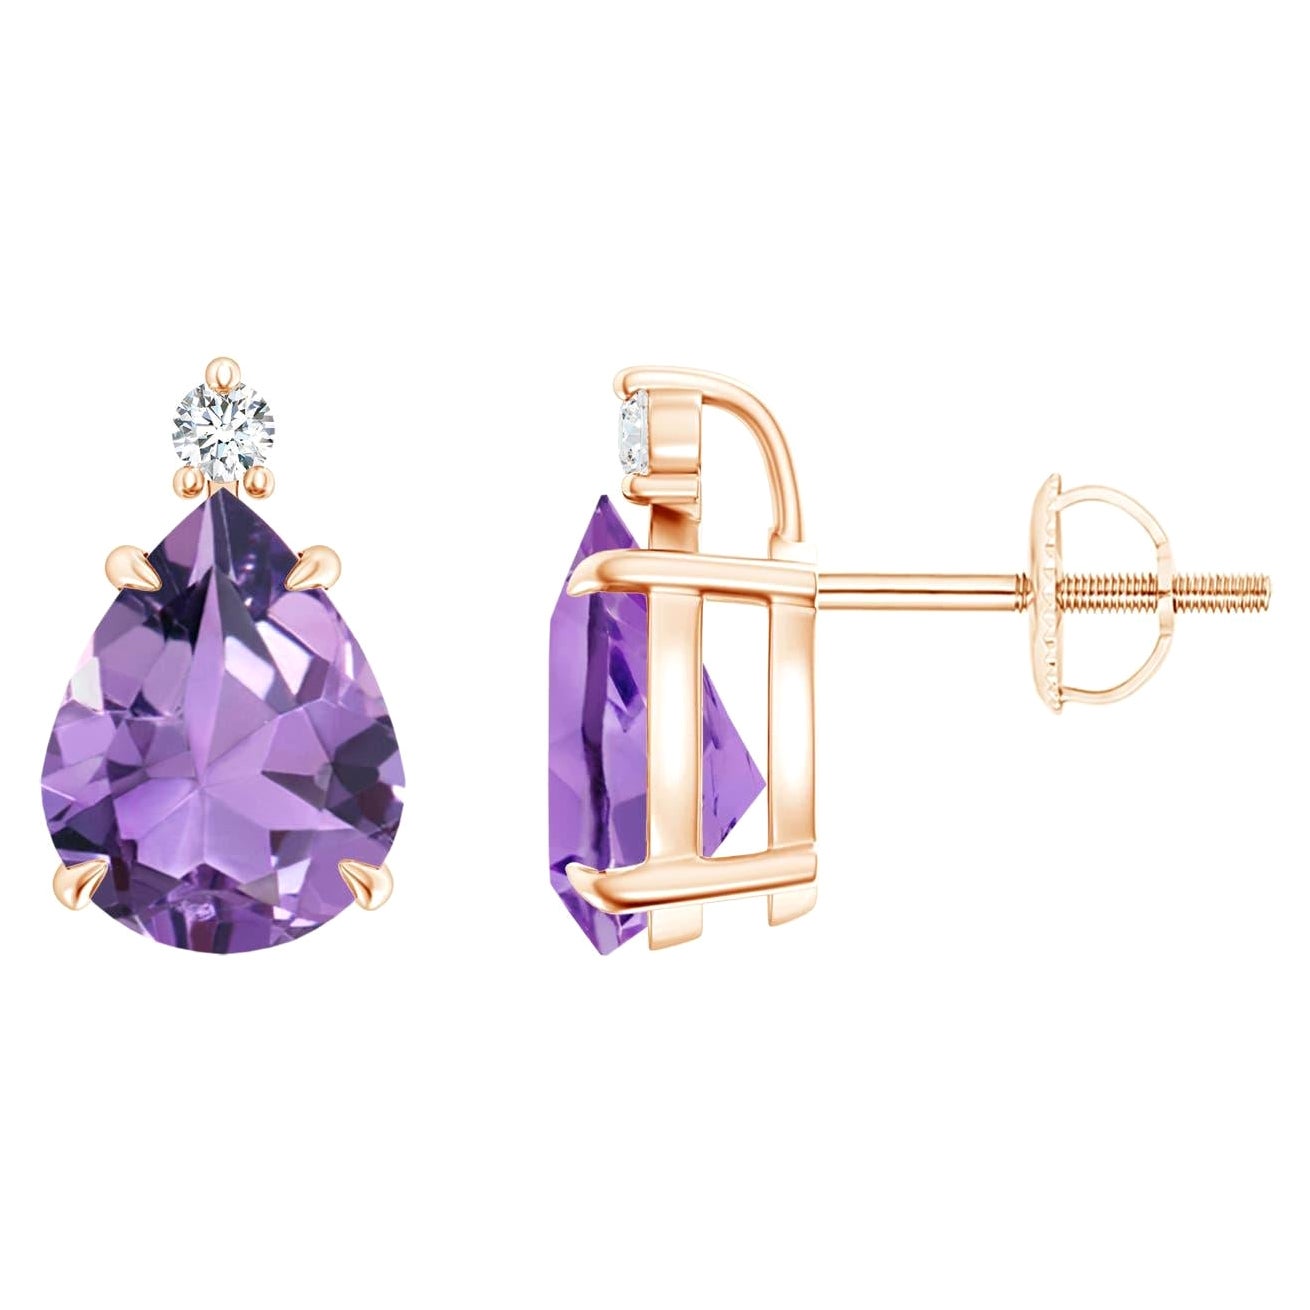 Natural Claw-Set Pear 3ct Amethyst Solitaire Earrings in 14K Rose Gold